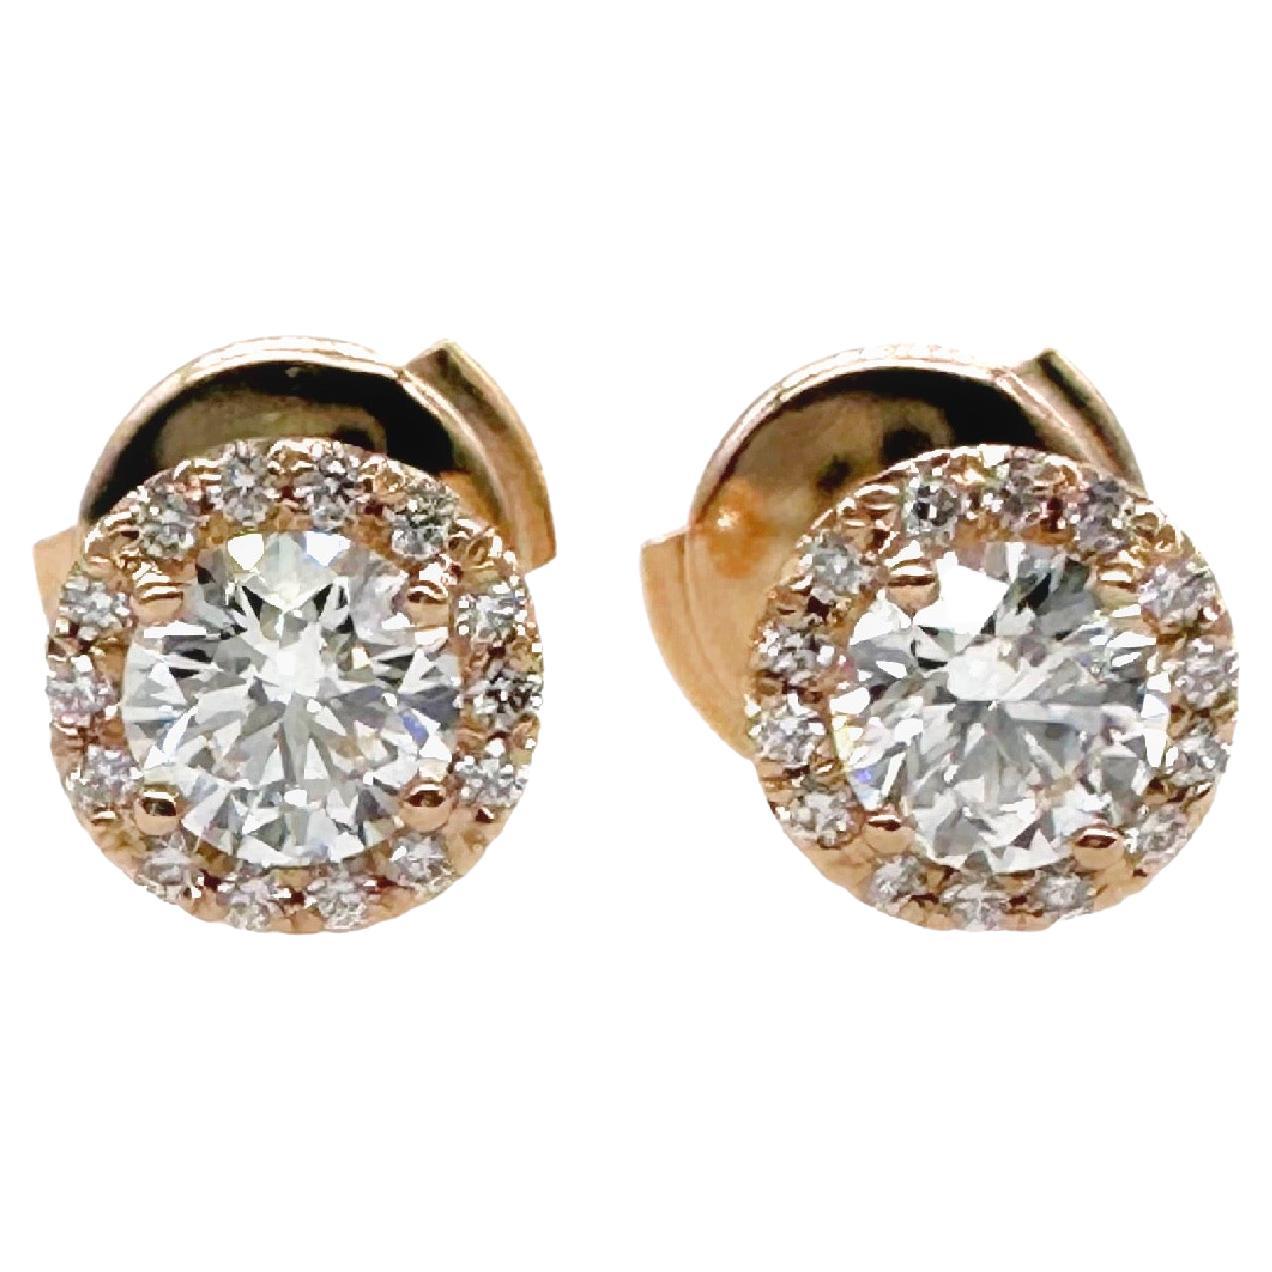 Tiffany Soleste earrings in platinum and 18k gold with yellow diamonds.